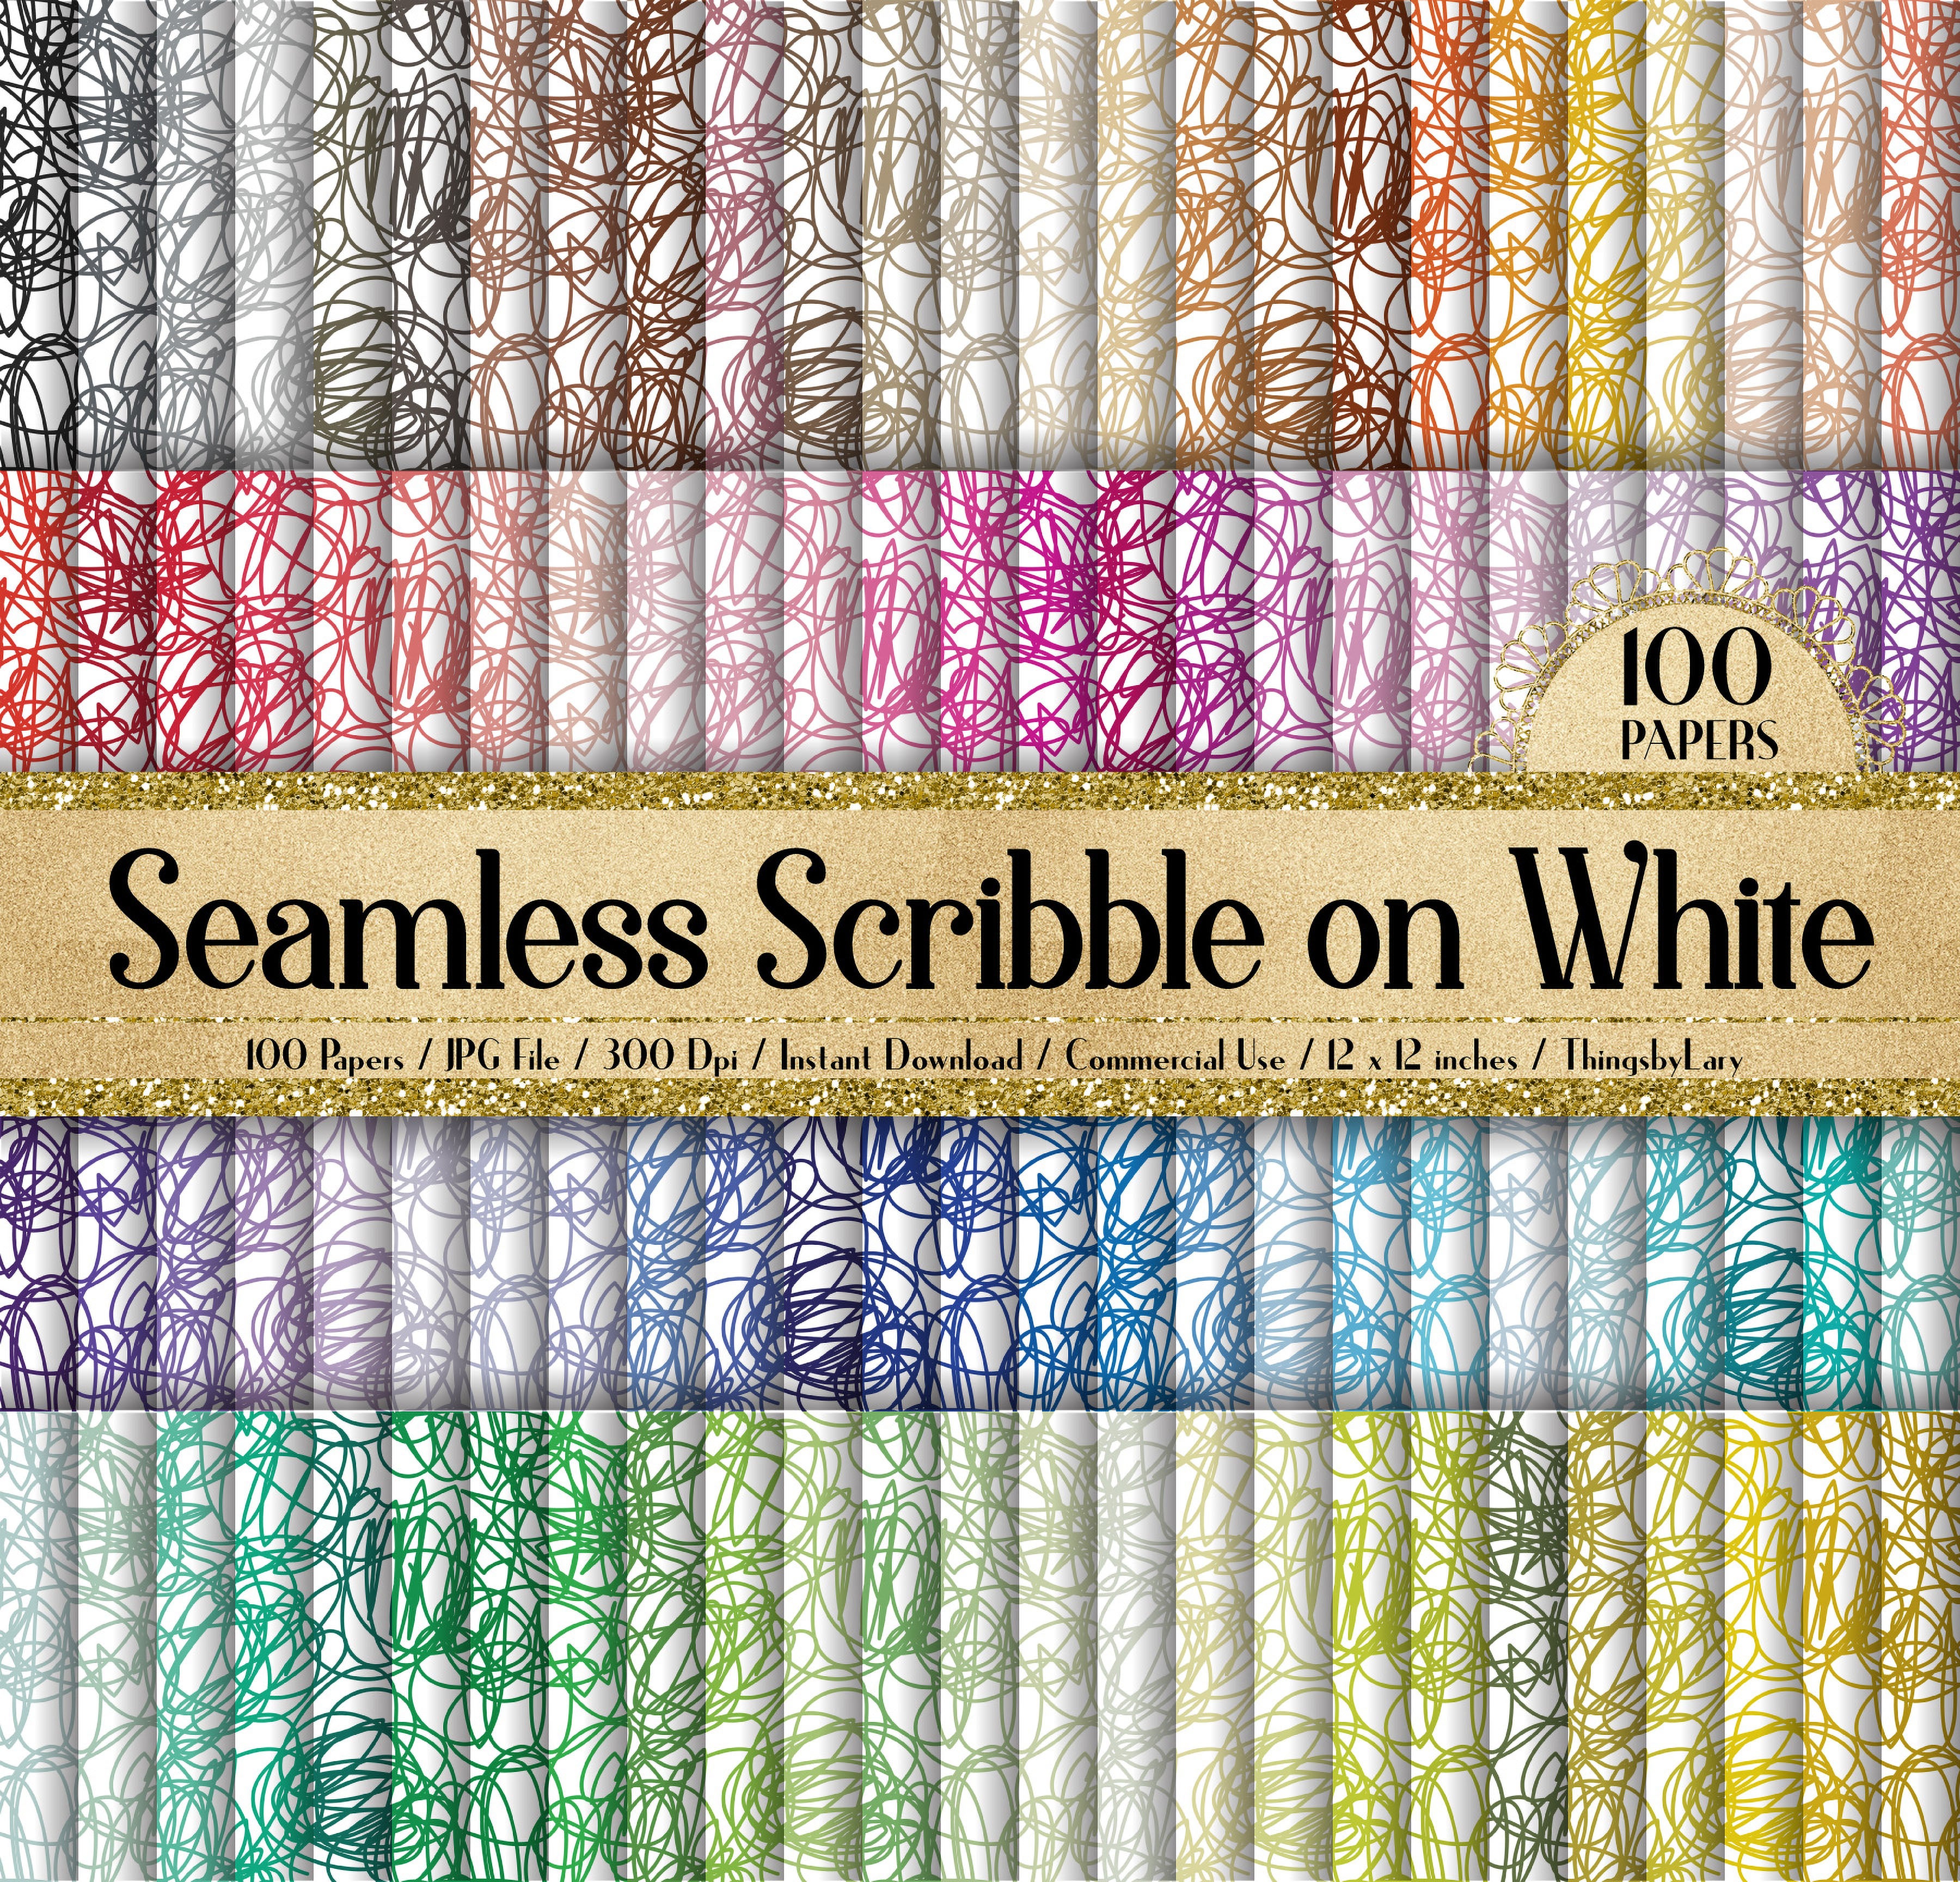 100 Seamless Scribble on White Digital Papers